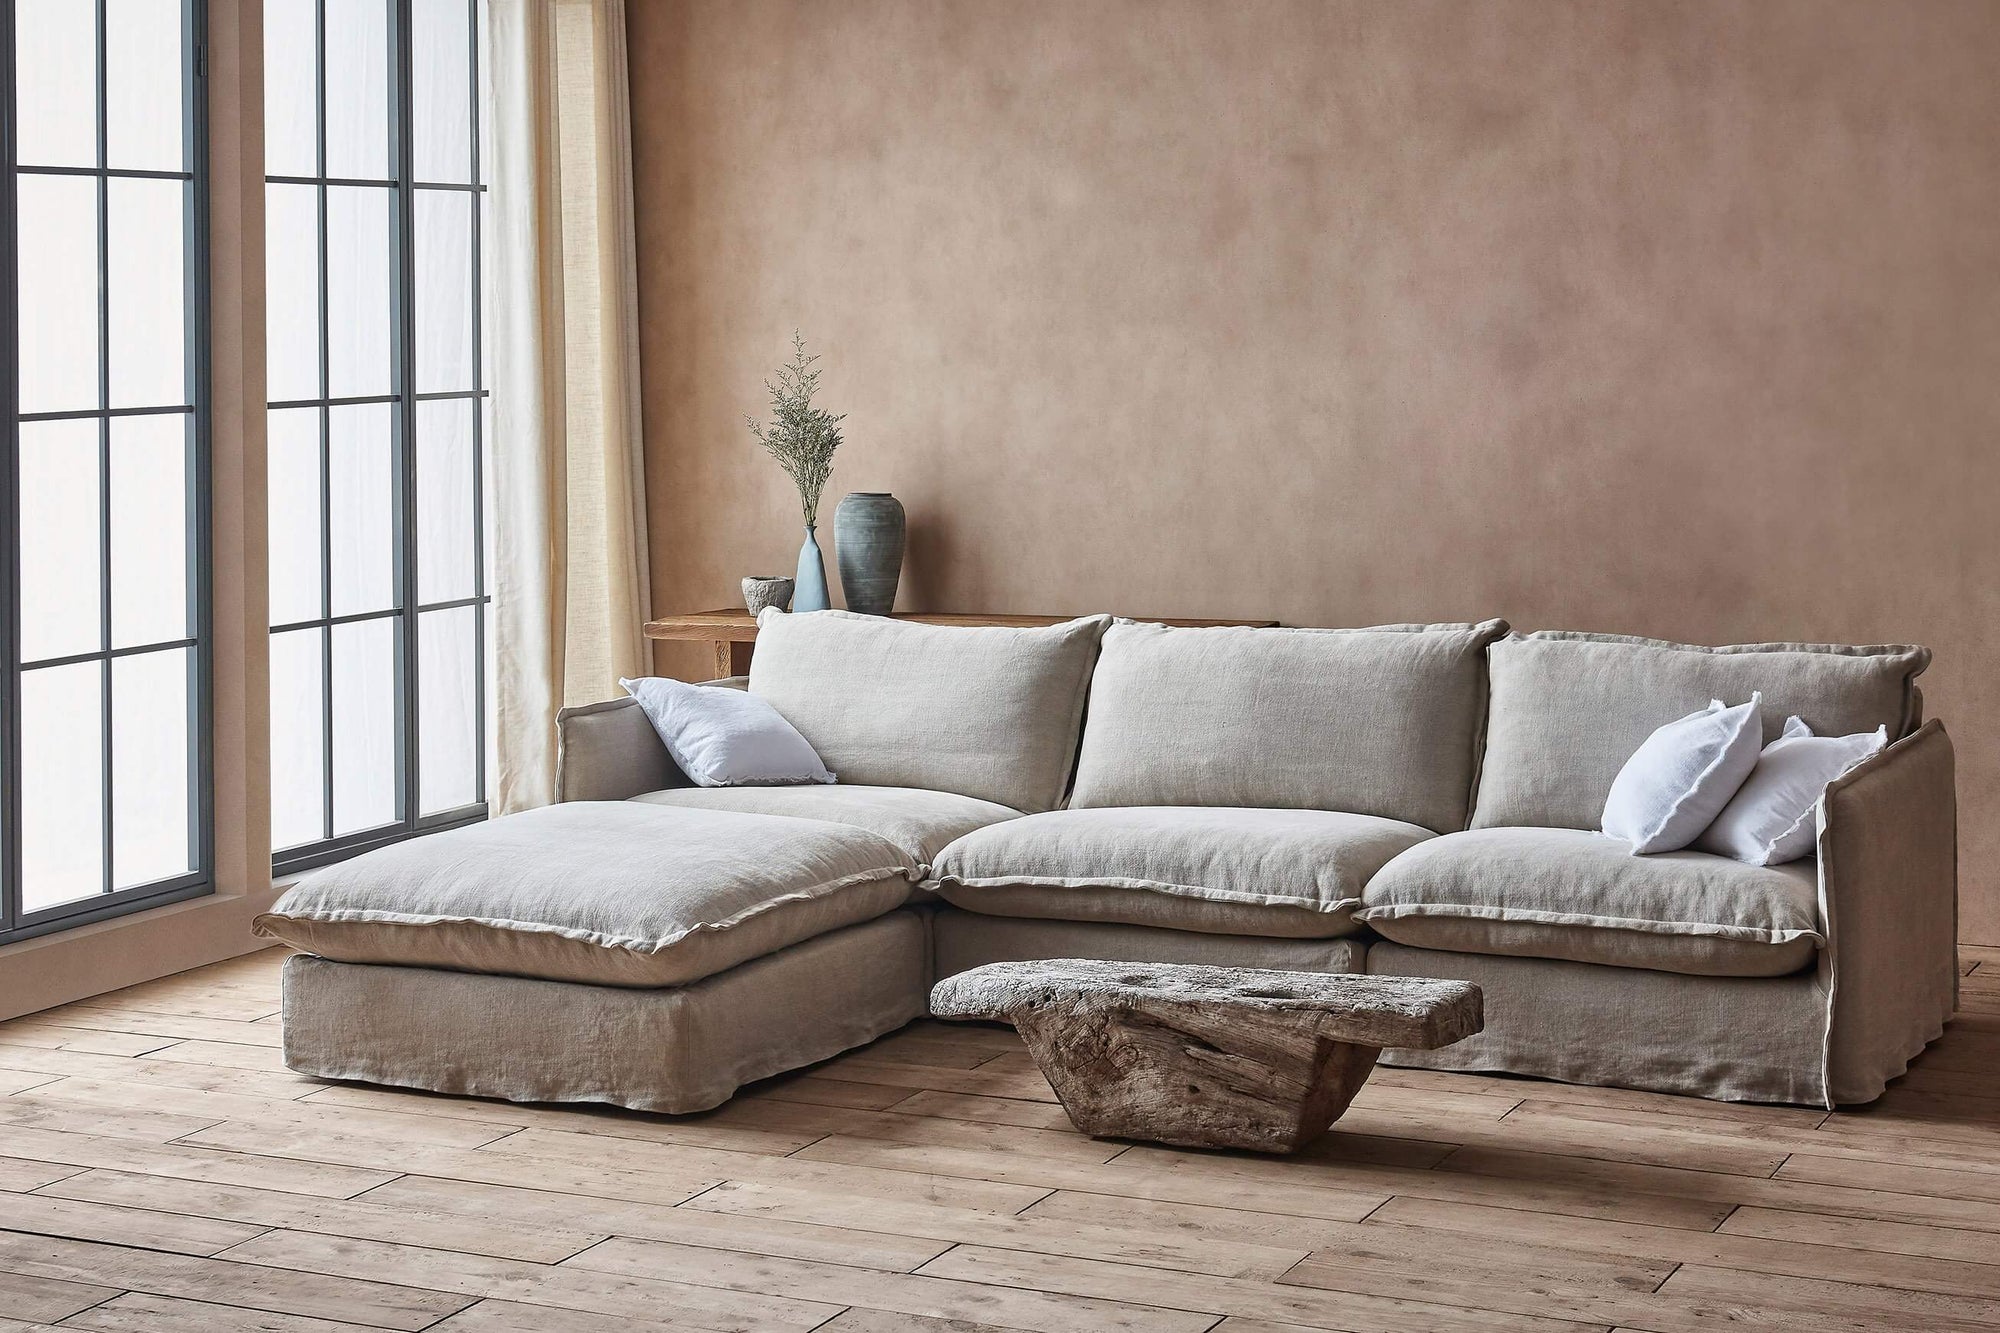 Neva 4-piece Chaise Sectional Sofa in Jasmine Rice, a light warm greige Medium Weight Linen, with white throw pillows, placed in a bright room with a thin stone coffee table